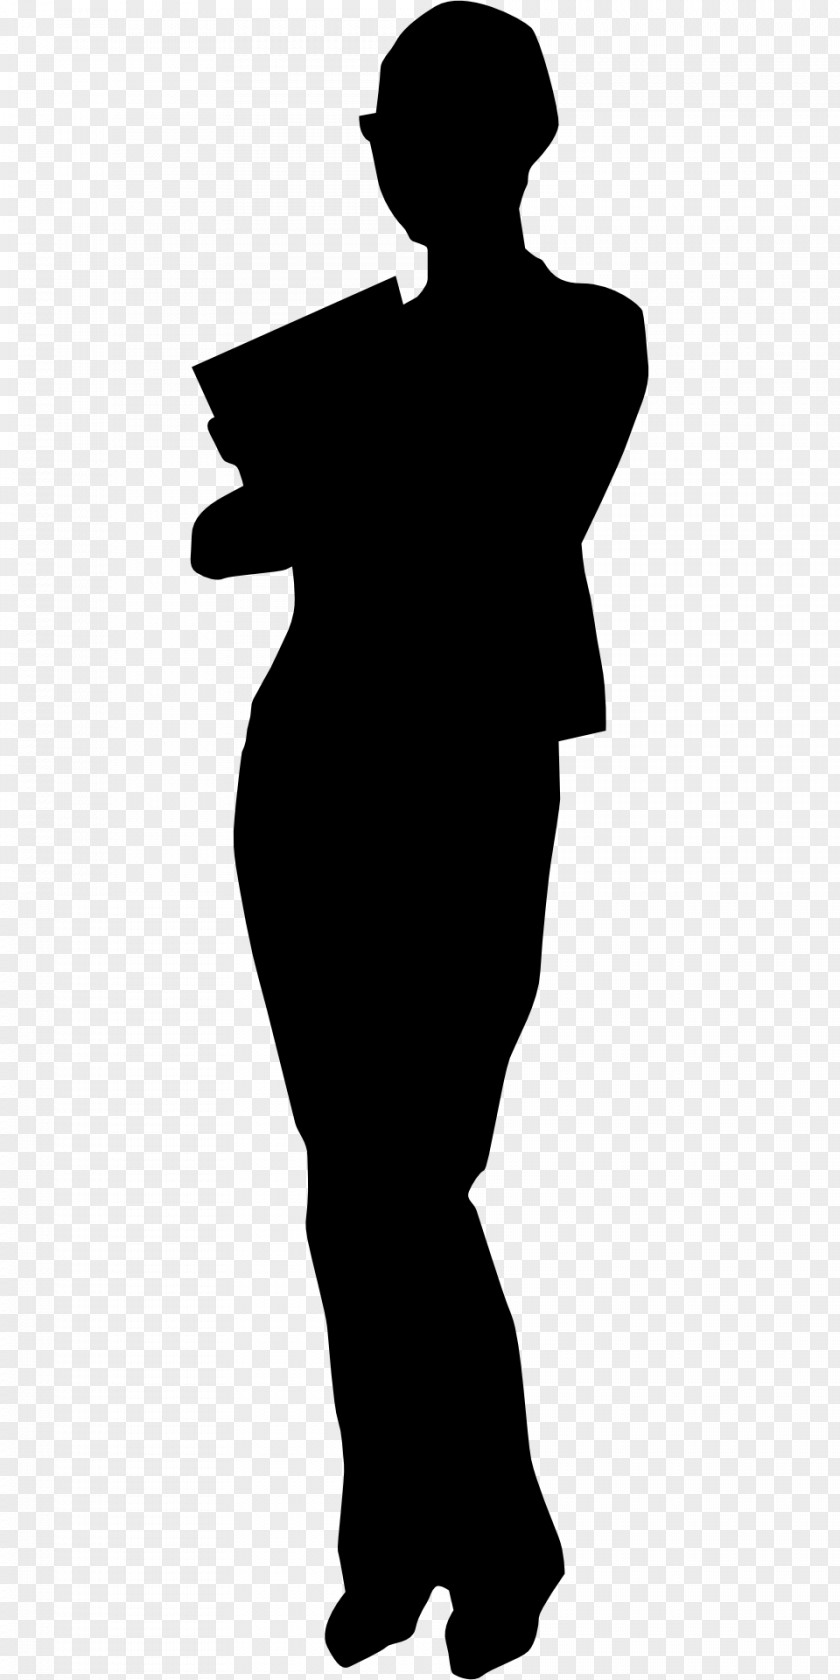 Woman Business Silhouette Clip Art PNG